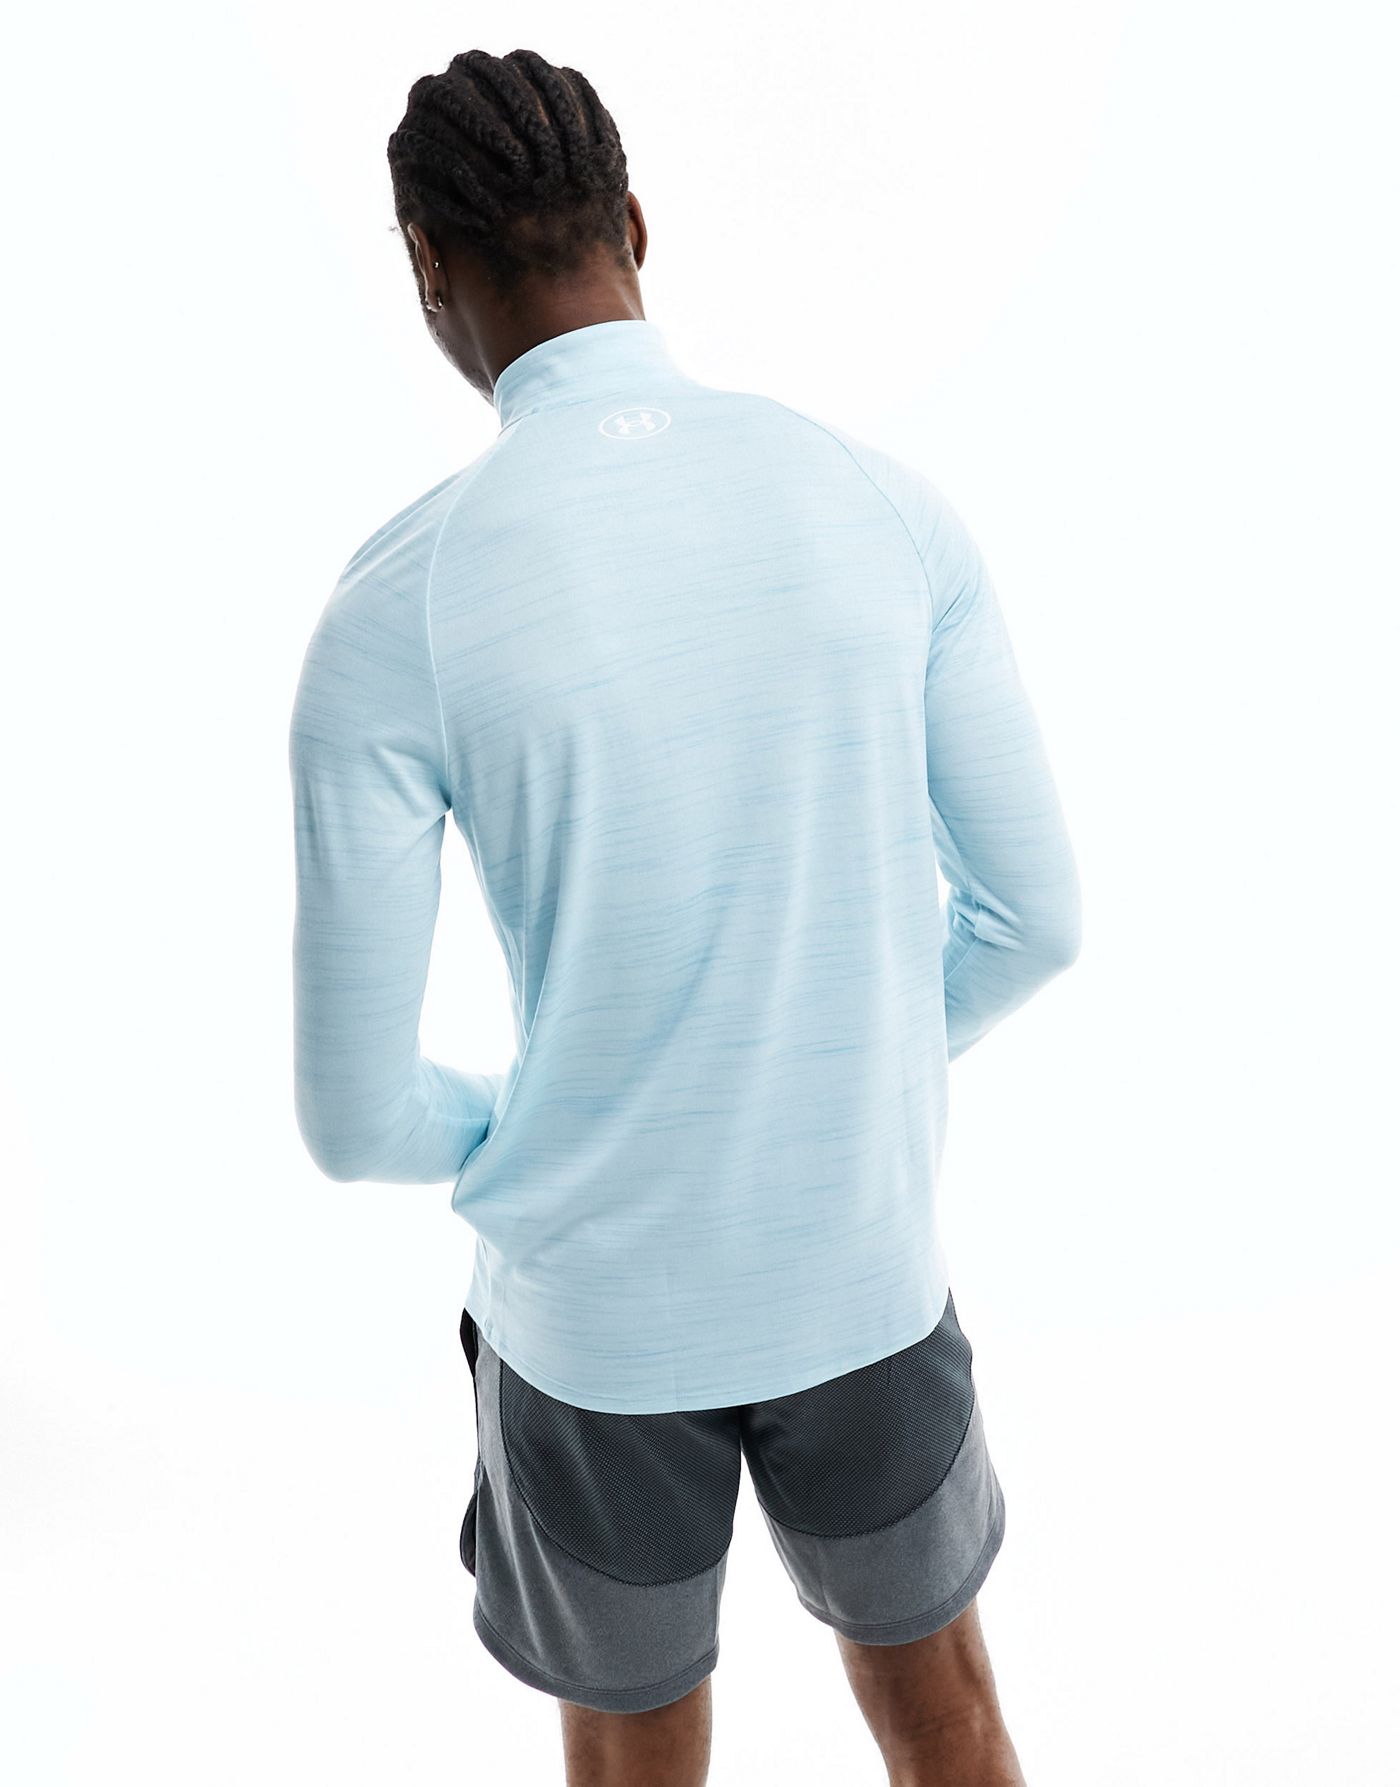 Under Armour Evolved Core Tech 2.0 t-half zip top in blue